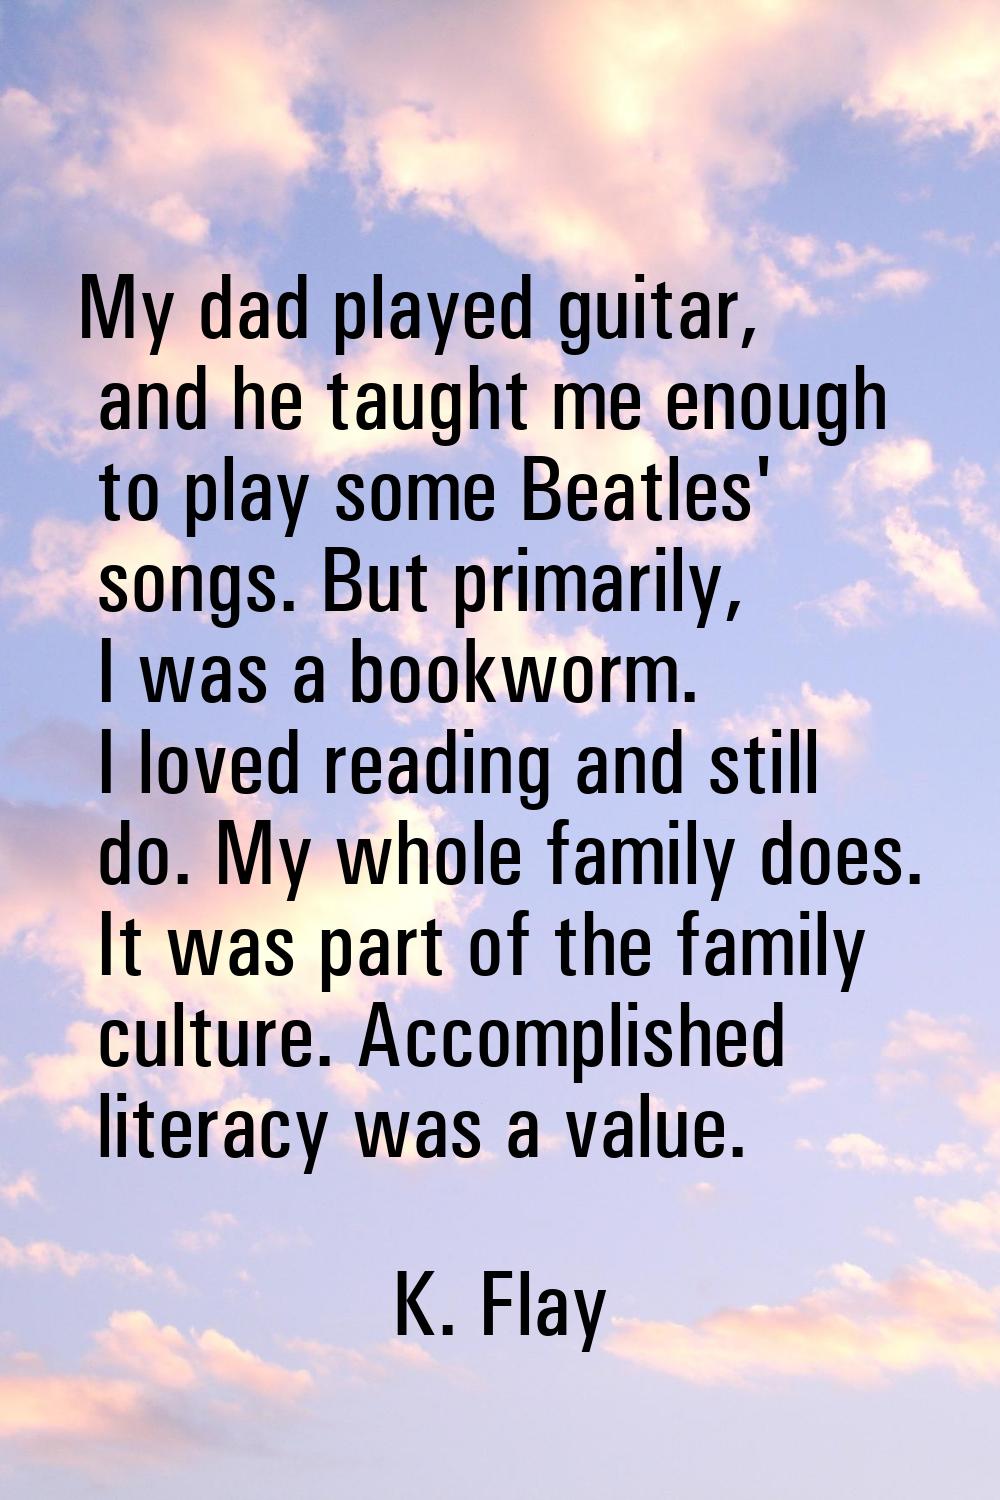 My dad played guitar, and he taught me enough to play some Beatles' songs. But primarily, I was a b